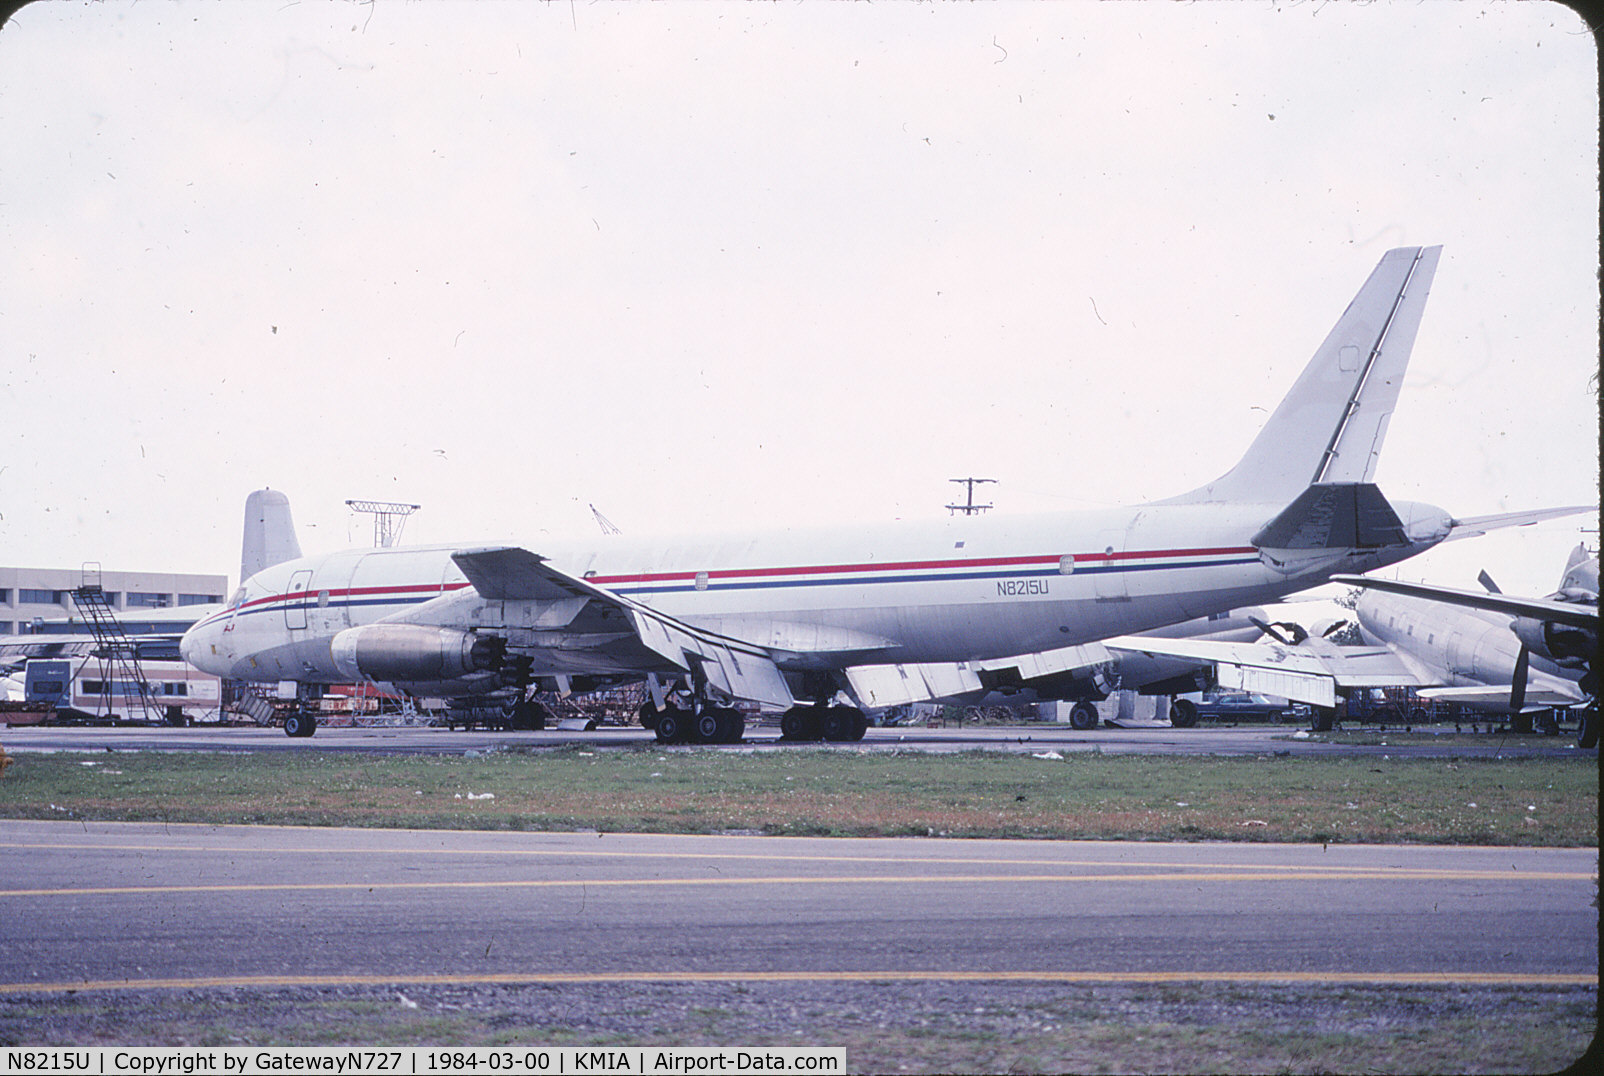 N8215U, 1960 Douglas DC-8-33 C/N 45261, Originally Clipper Gauntlet with PAA, later to United. Delivered as a DC-8-32, original JT3's were replaced with P&W JT4's to make a -33 (JT4's shown). Conner Air Line colors. Broken up in MIA 18 months after this photo was taken.